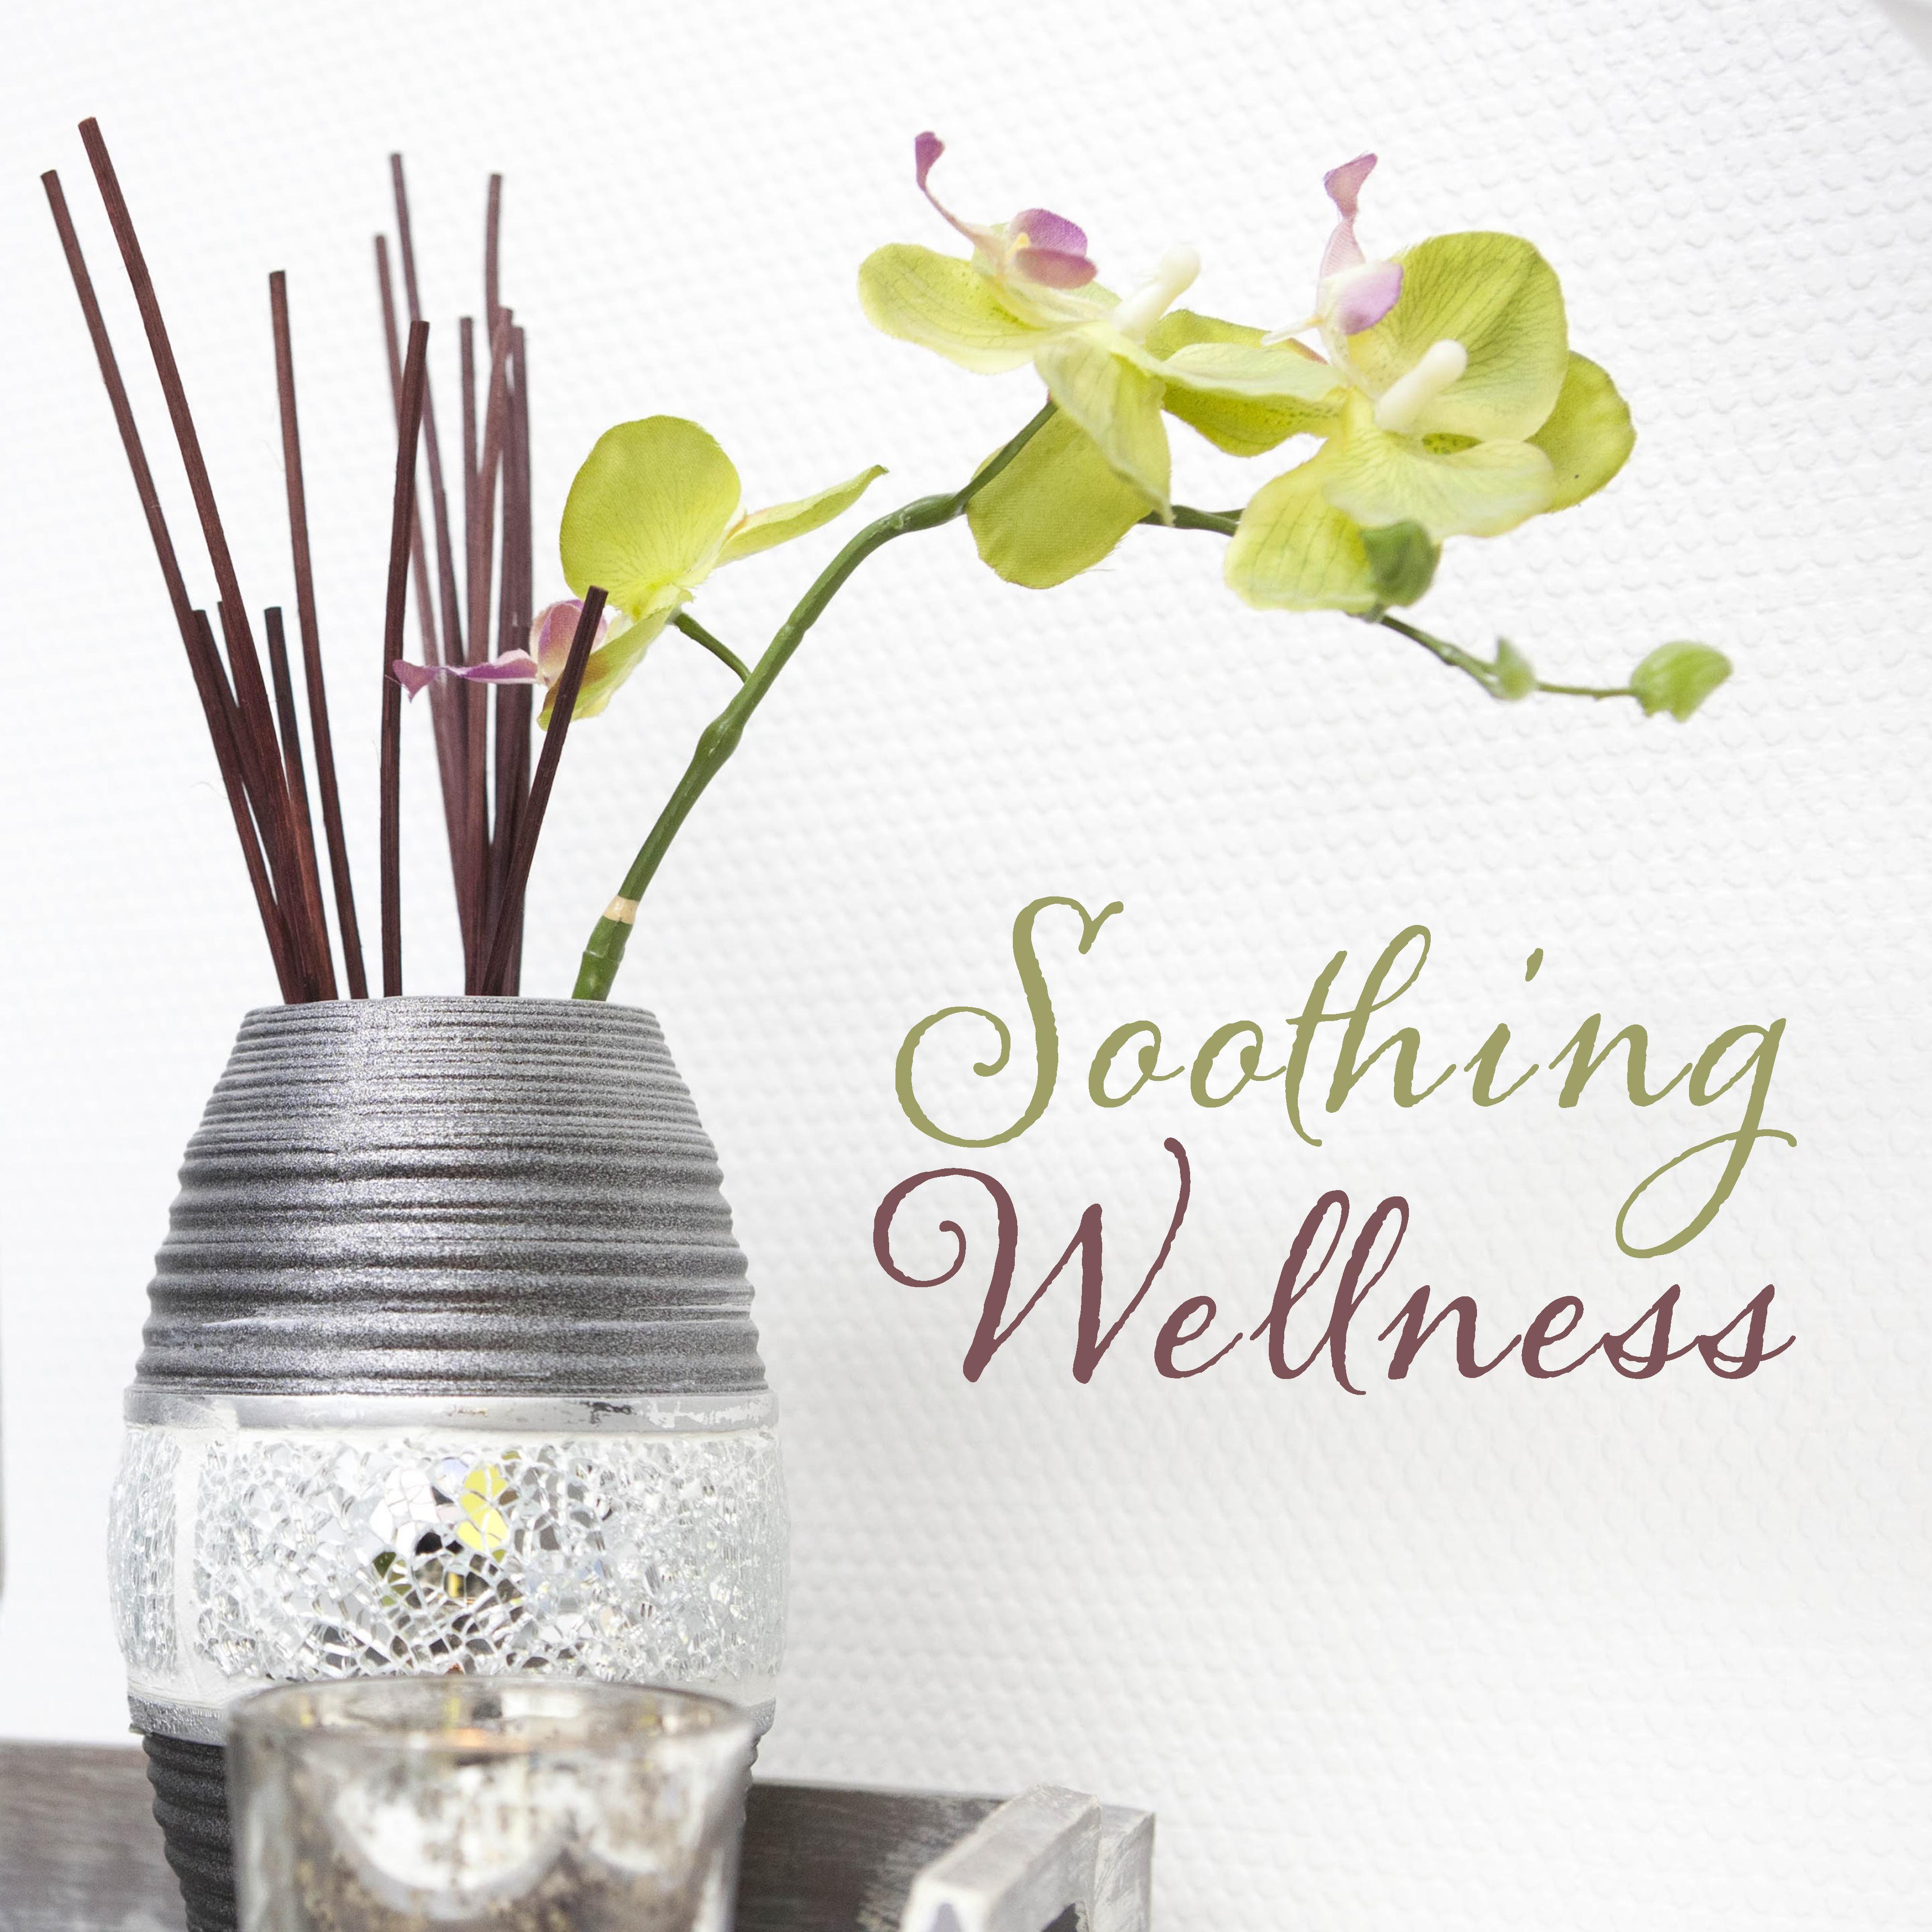 Soothing Wellness  Serenity Zen Spa, Massage Music, Stress Relief, Therapy for Body, Calming Nature Sounds